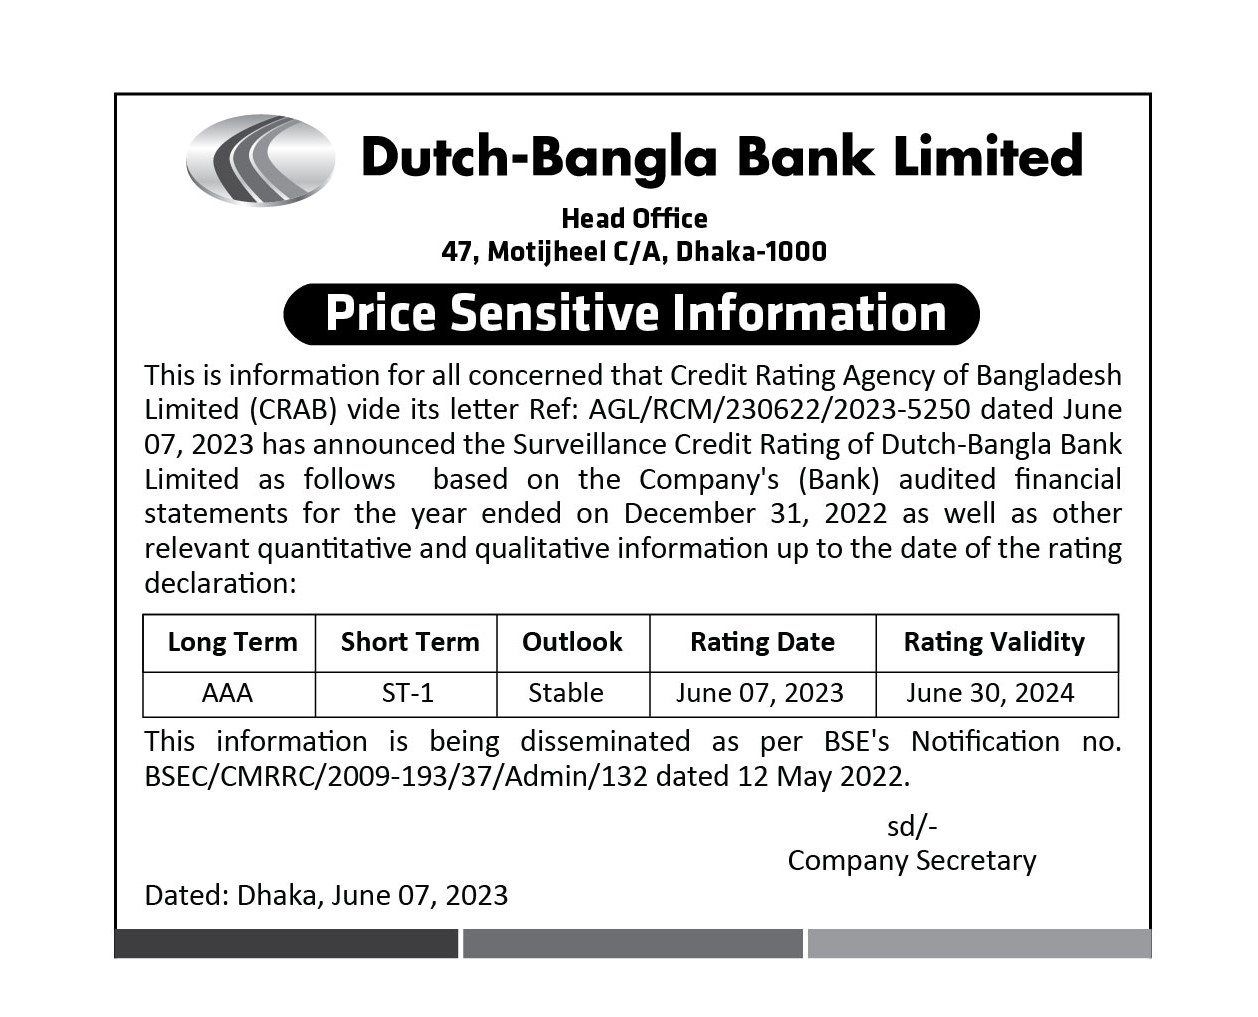 Credit Rating information of Dutch-Bangla Bank PLC.for the year ended on December 31, 2022